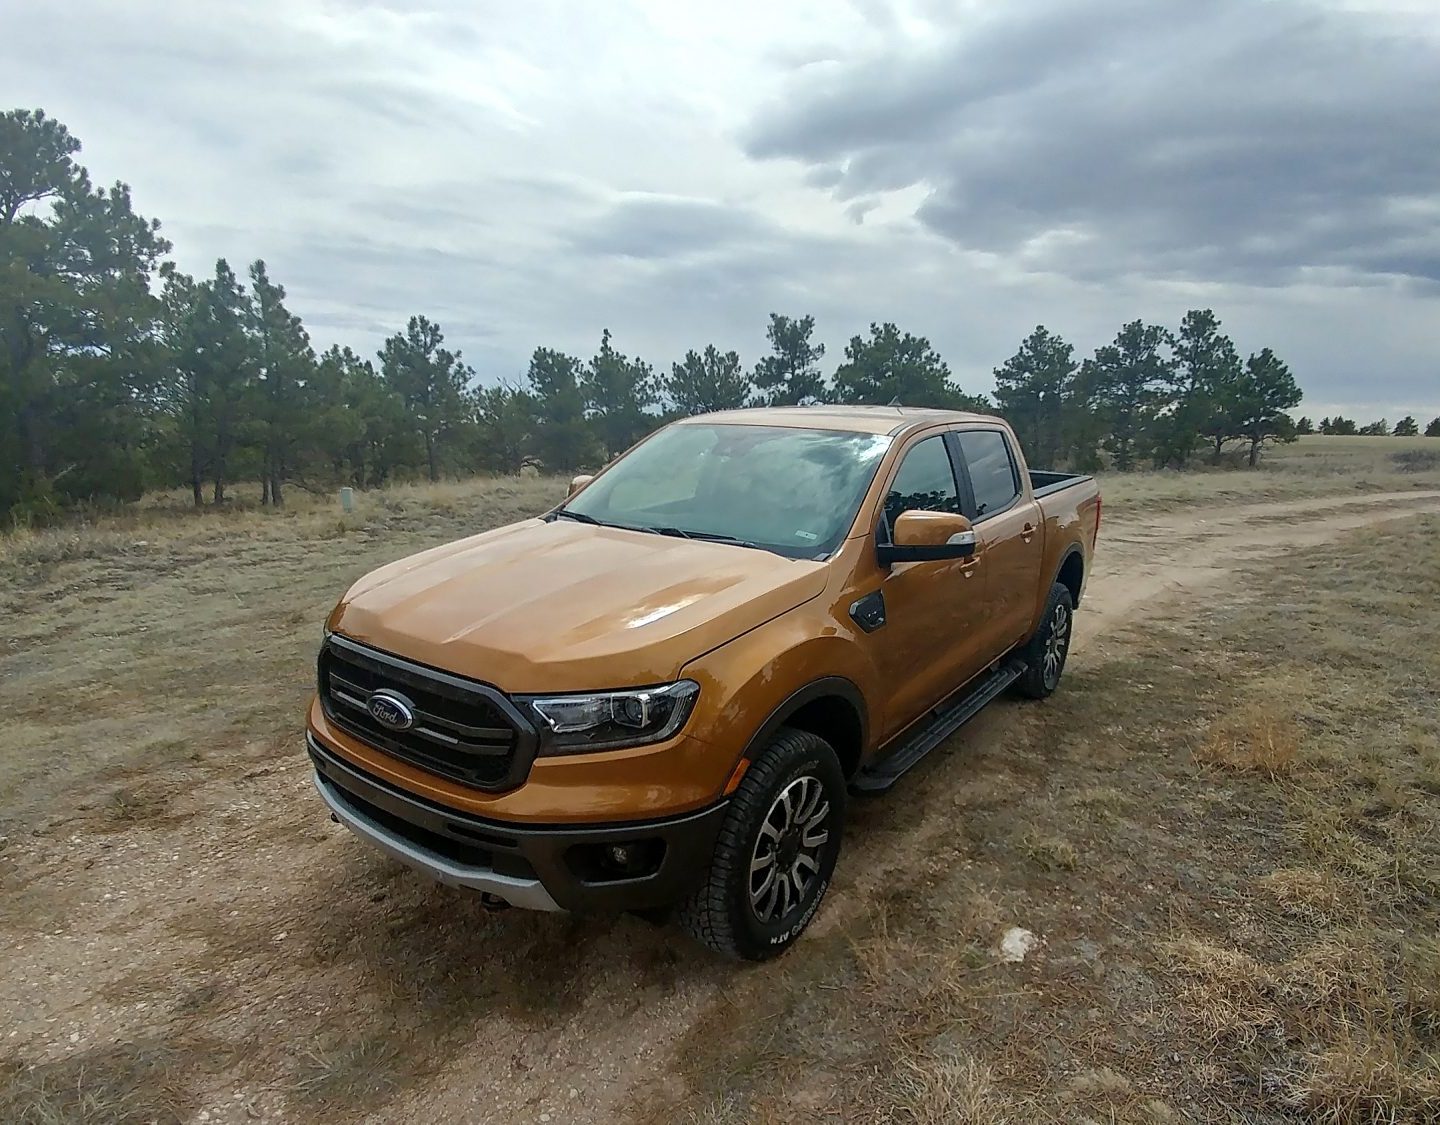 Video Review: 2019 Ford Ranger Brings Back the Icon